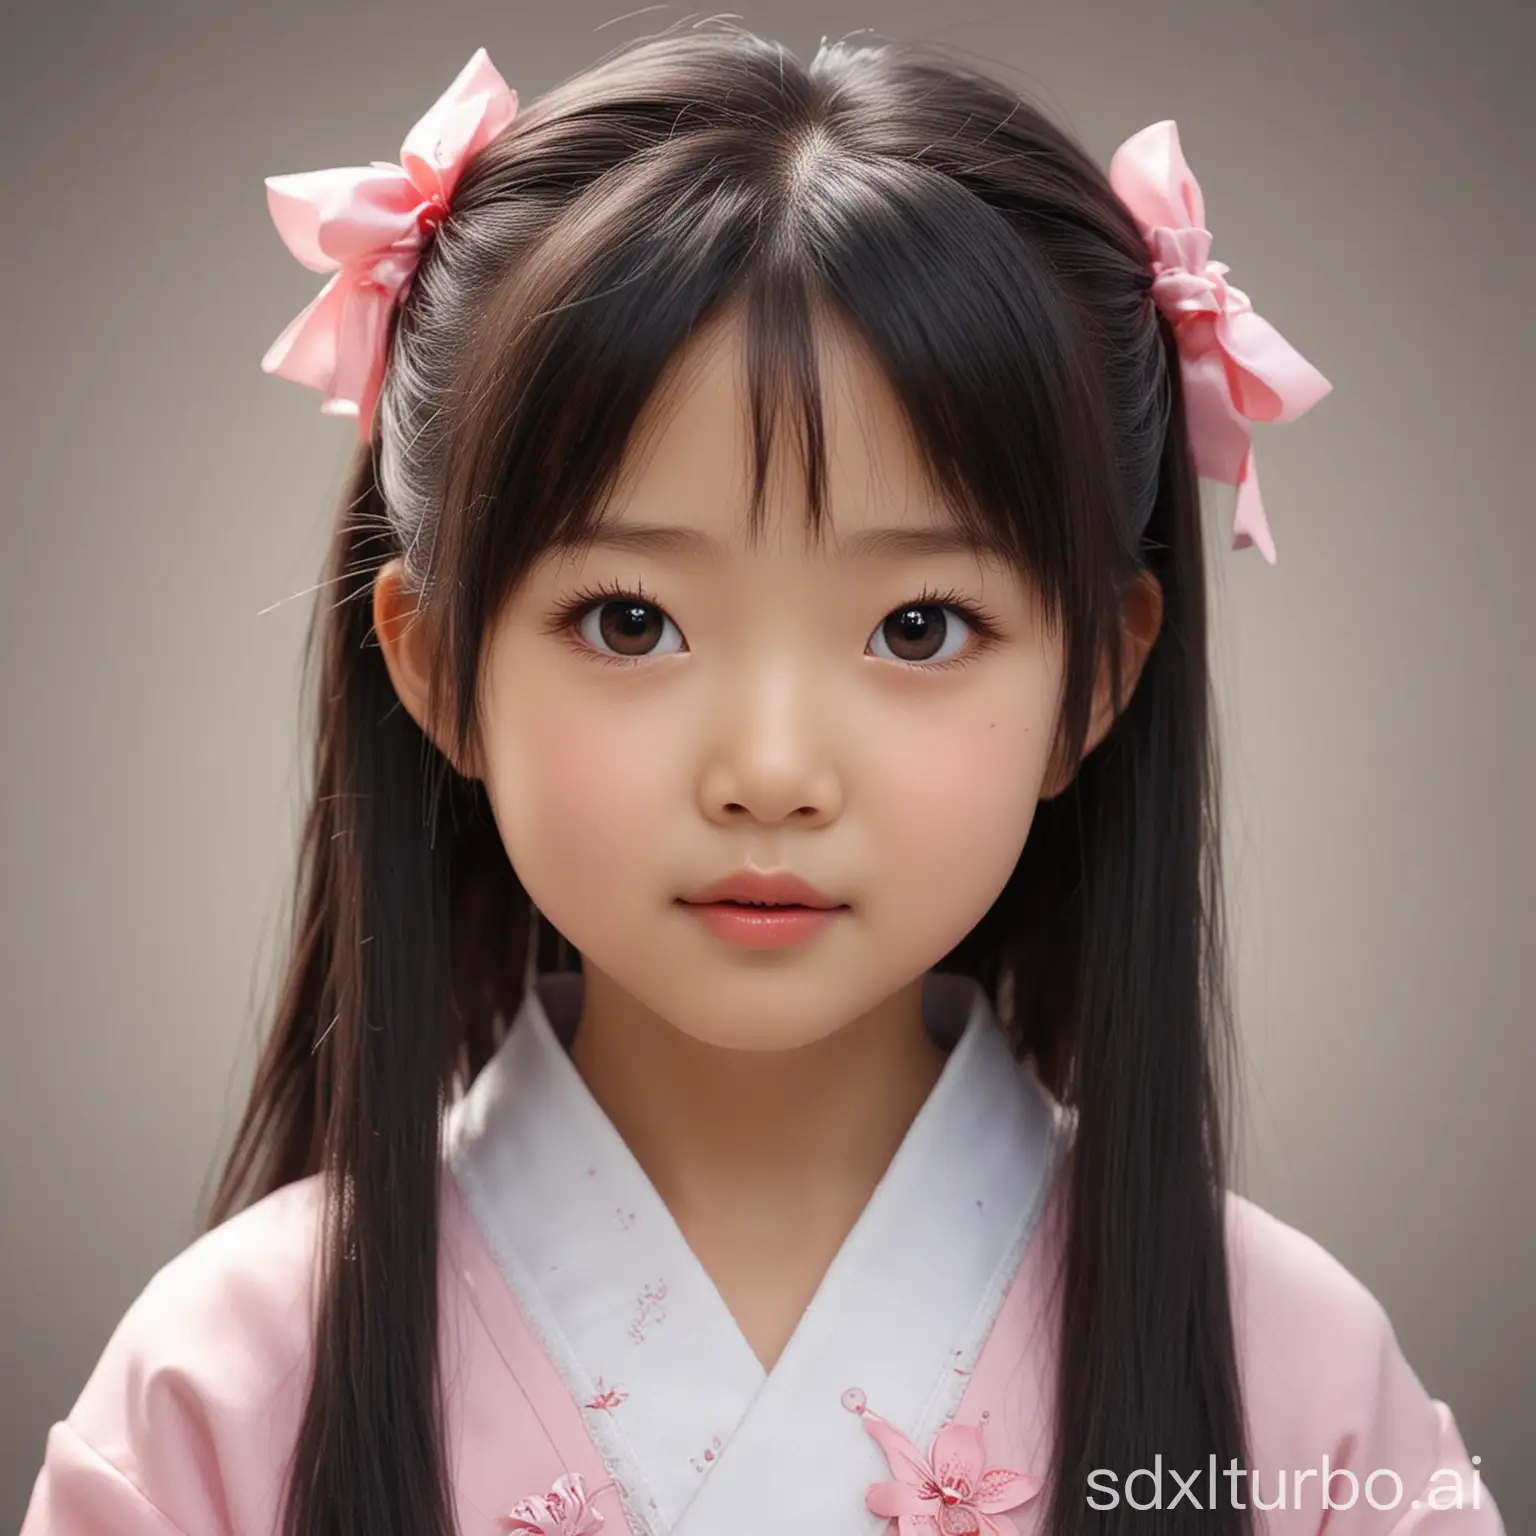 Generate a little Chinese girl